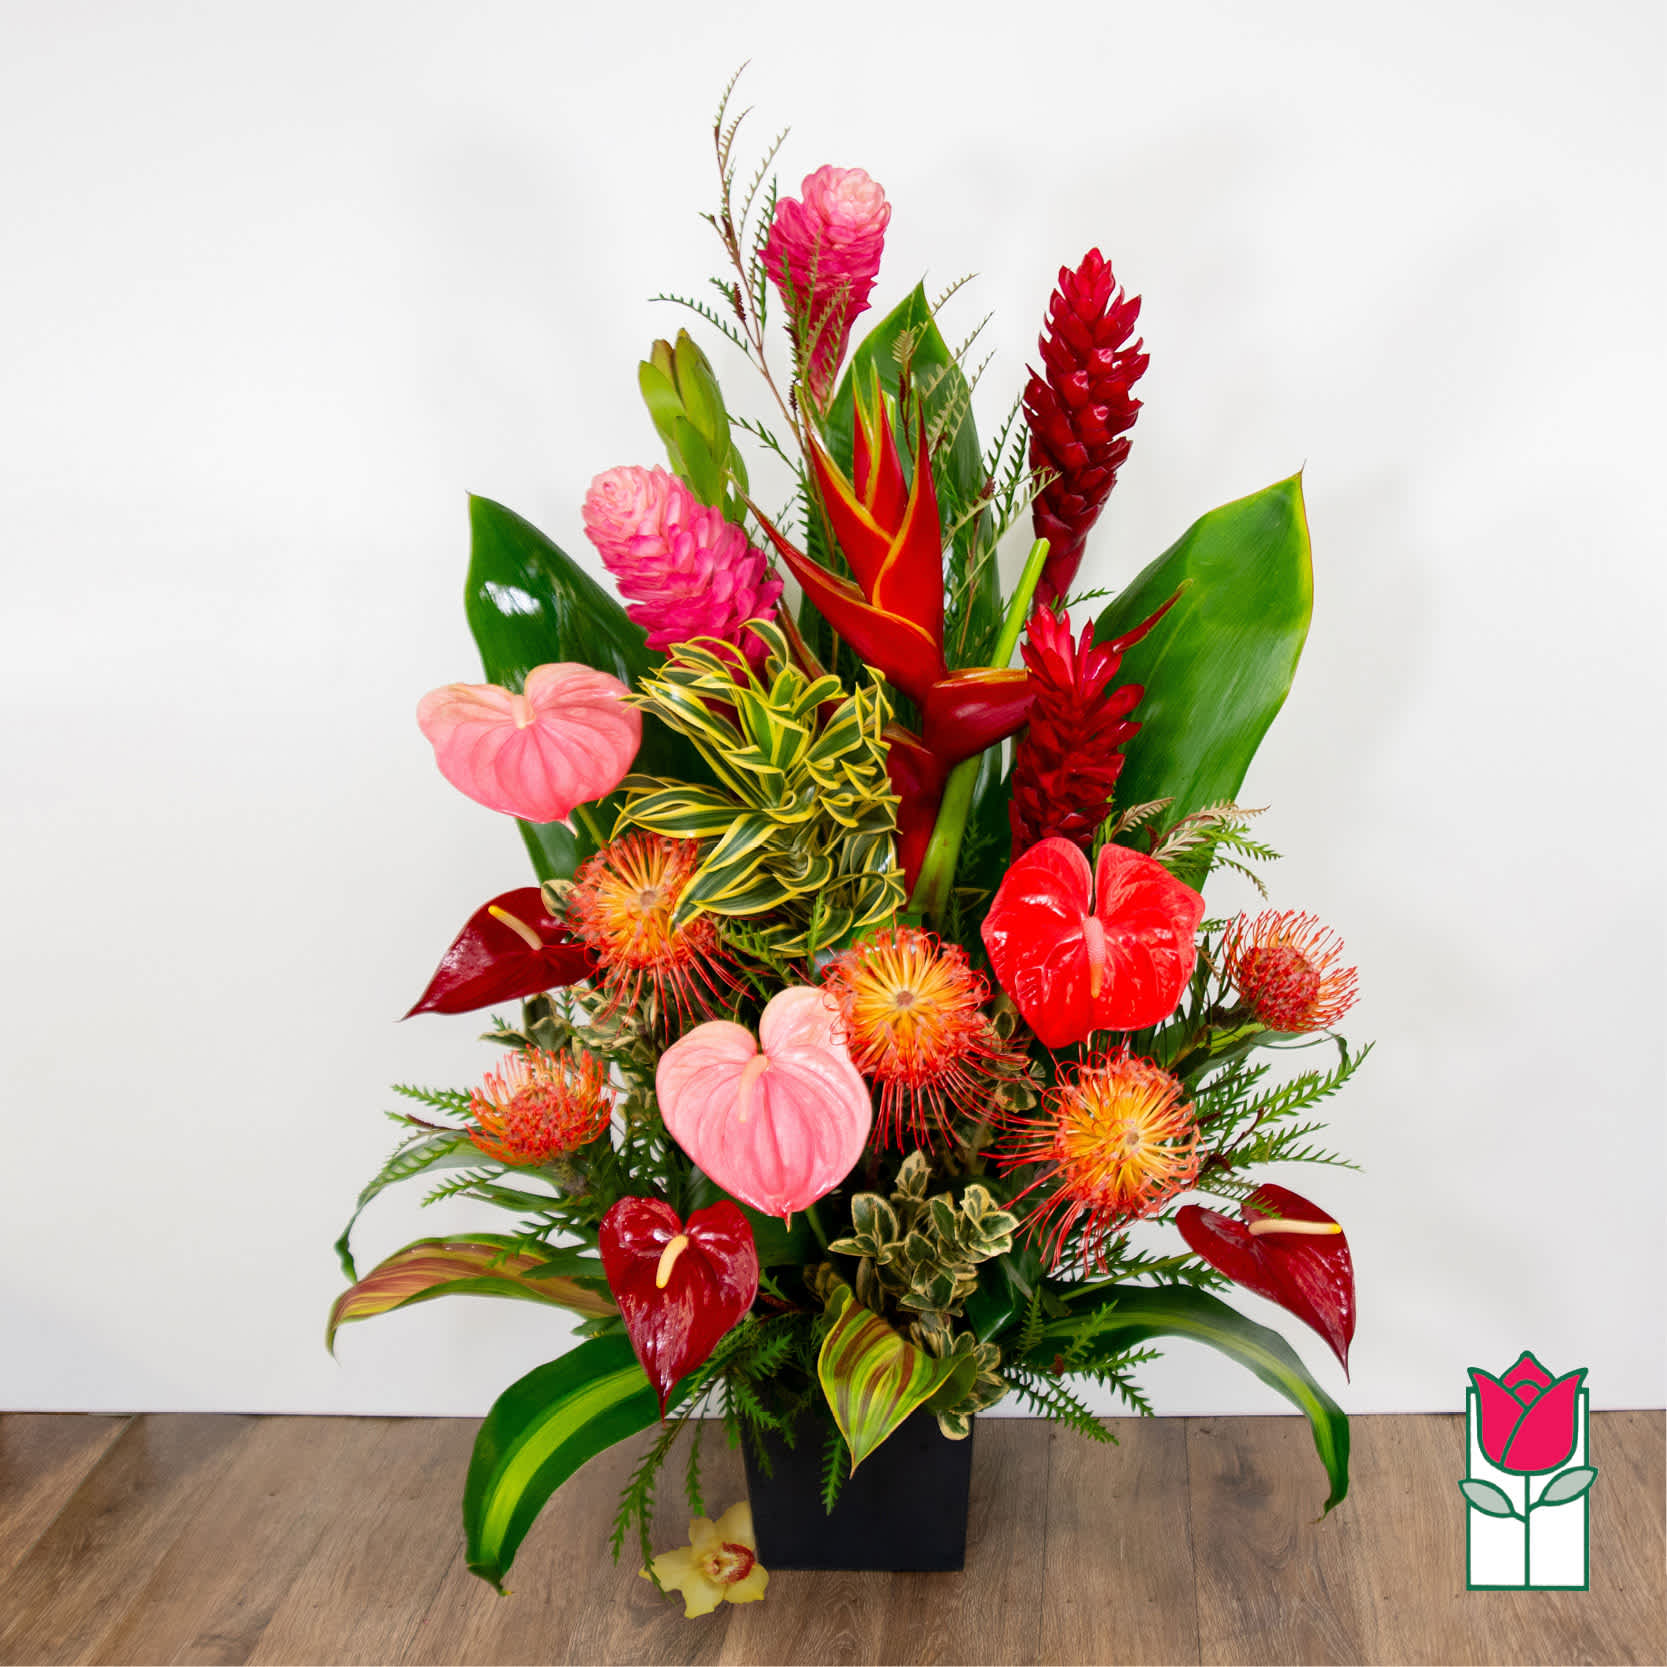 Beretania's Aloha Tropical Bouquet (Seasonal Varieties Vary) - The Beretania Florist Aloha Tropical bouquet is a stunning and unique floral arrangement that will transport you to the lush and vibrant landscapes of Hawaii. This compact arrangement is crafted using a beautiful combination of seasonally available tropical flowers, including cymbidium orchids, ginger, anthuriums, protea, and pincushions, as well as other mixed garden flowers.  The flowers are arranged in a premium vase, which adds a touch of sophistication and style to this already gorgeous bouquet. Its compact size makes it perfect for any space, from a small desk to a bedside table.  This popular item is now available for delivery in the Honolulu area, making it easy and convenient to add a touch of the tropics to your home or office.  The Beretania Florist Aloha Tropical bouquet is thoughtfully crafted using the best seasonal flowers available, ensuring that every bouquet is unique and special. Its bold and vibrant colors and unique tropical blooms make it perfect for any occasion, from housewarming gifts to wedding centerpieces.  Order now and let the beauty of this stunning arrangement speak for itself. Whether you're celebrating a special occasion or simply want to add a touch of the tropics to your space, the Beretania Florist Bishop Tropical bouquet is the perfect choice.